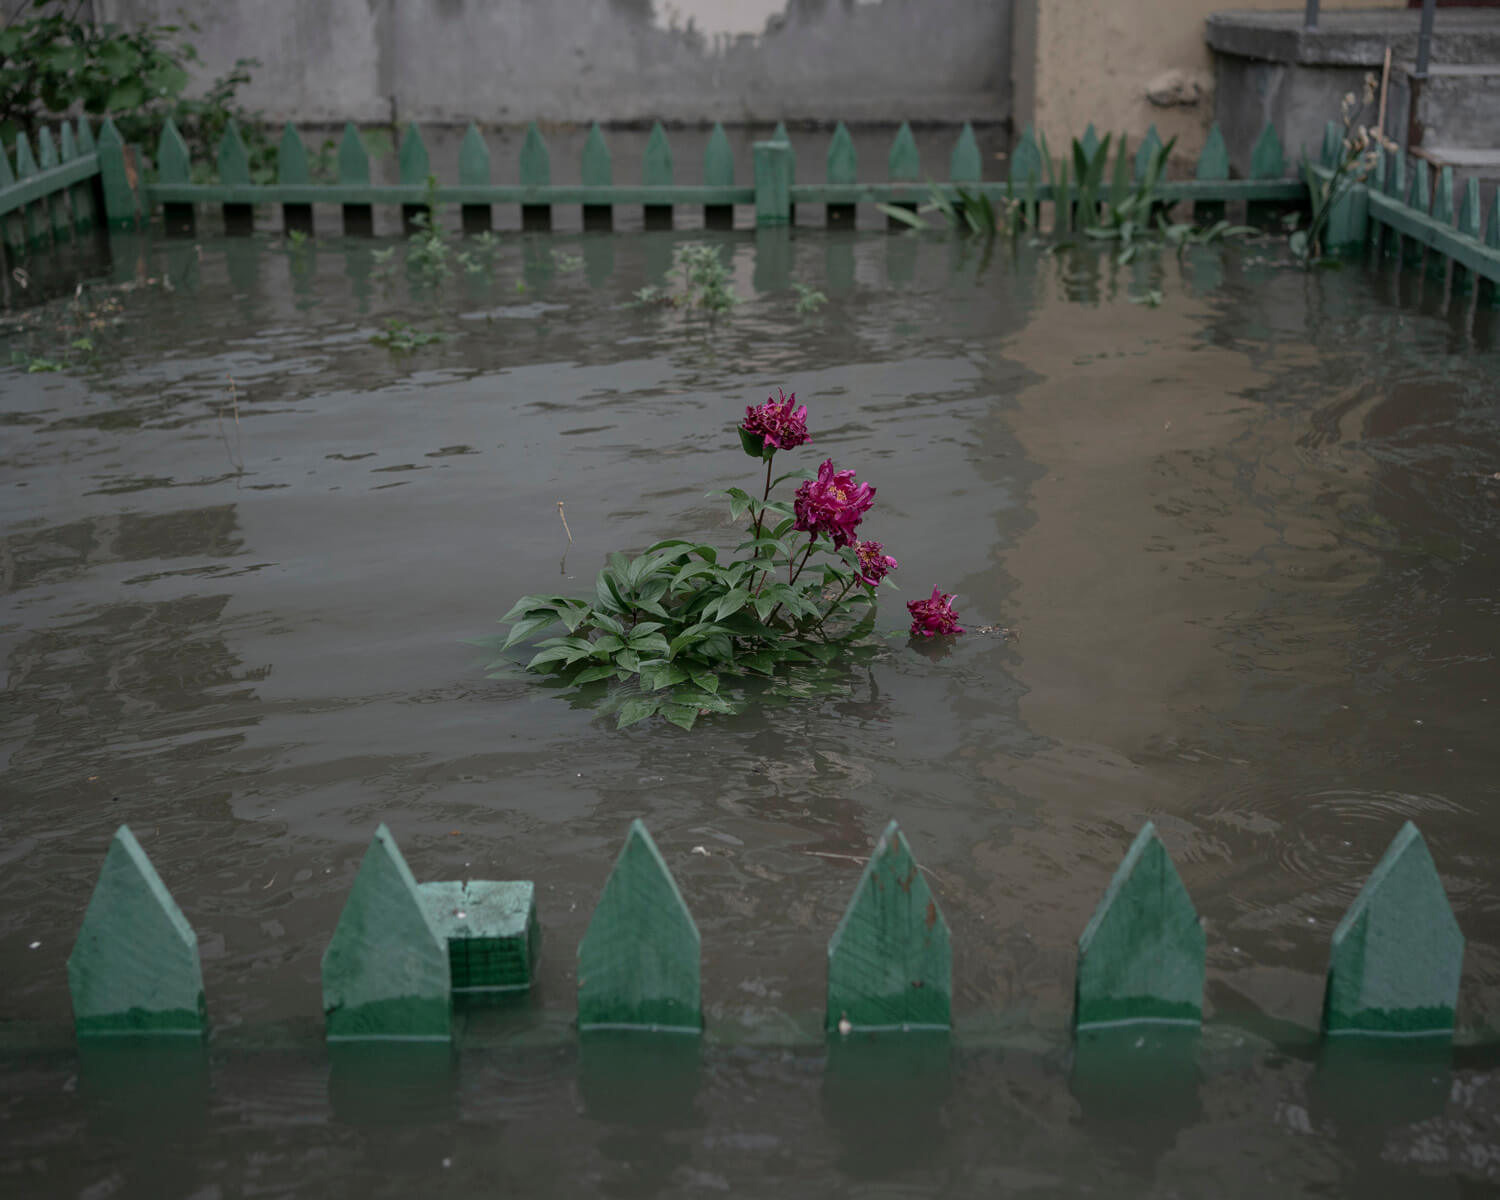 A flooded urban yard with pink flowers emerging from the water, a poignant scene highlighting the devastation of flooding